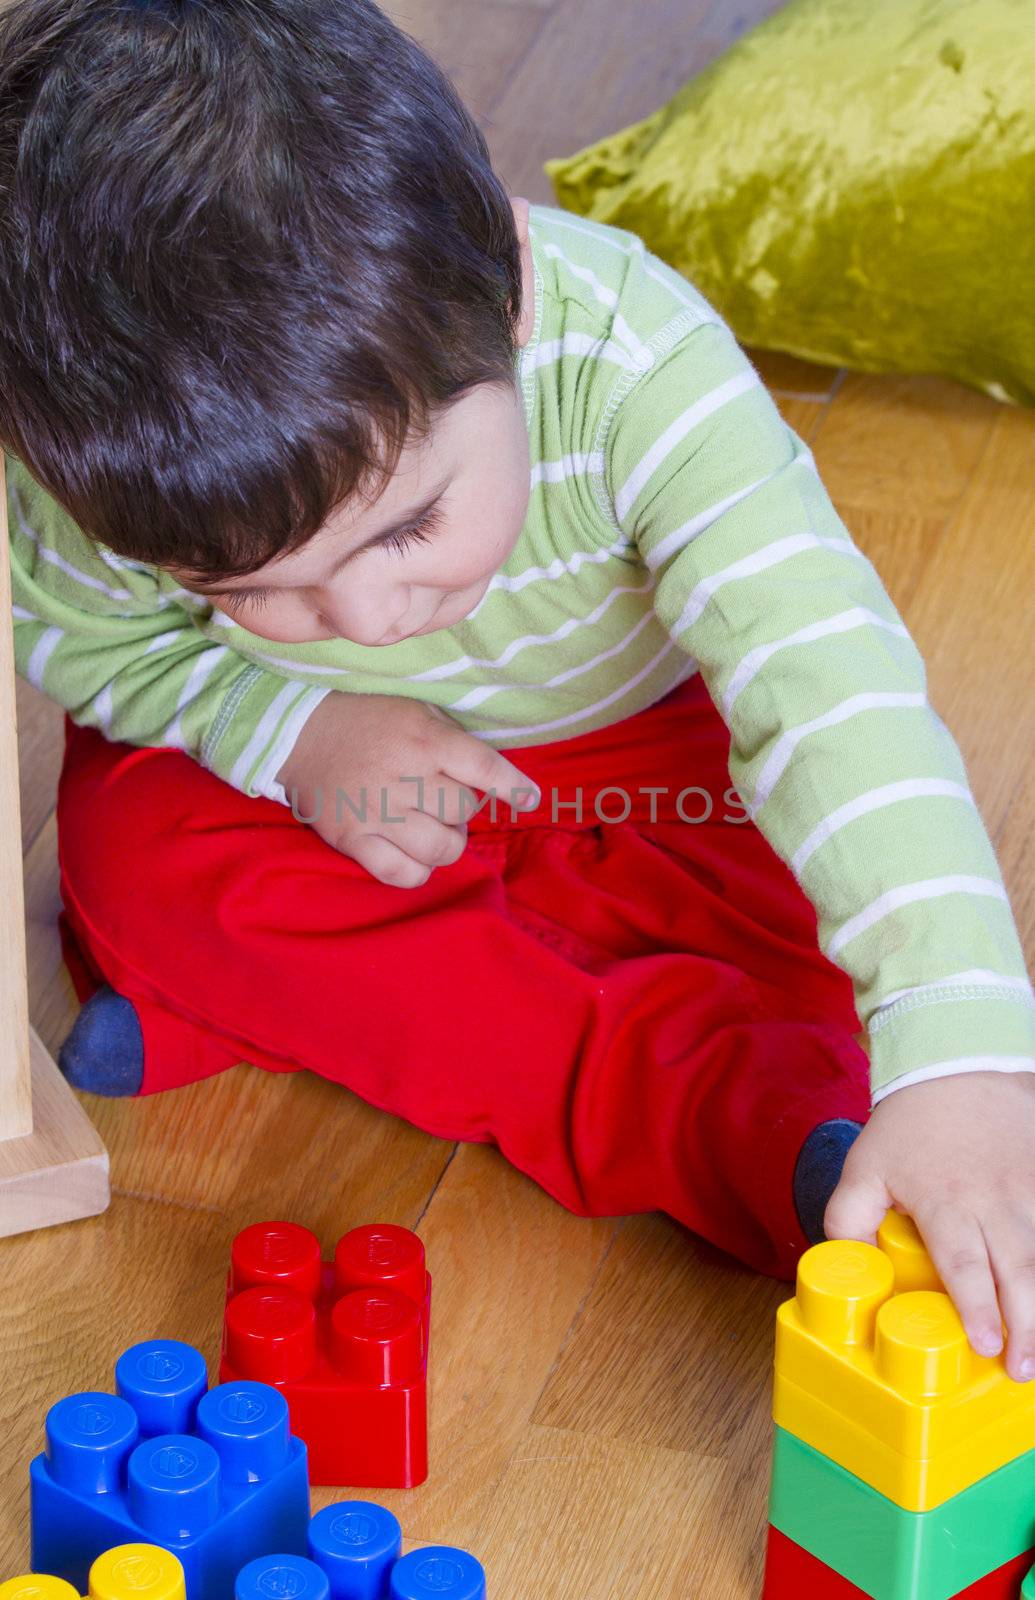 Little baby boy (2 years old) playing with toy blocks. Funny edu by FernandoCortes